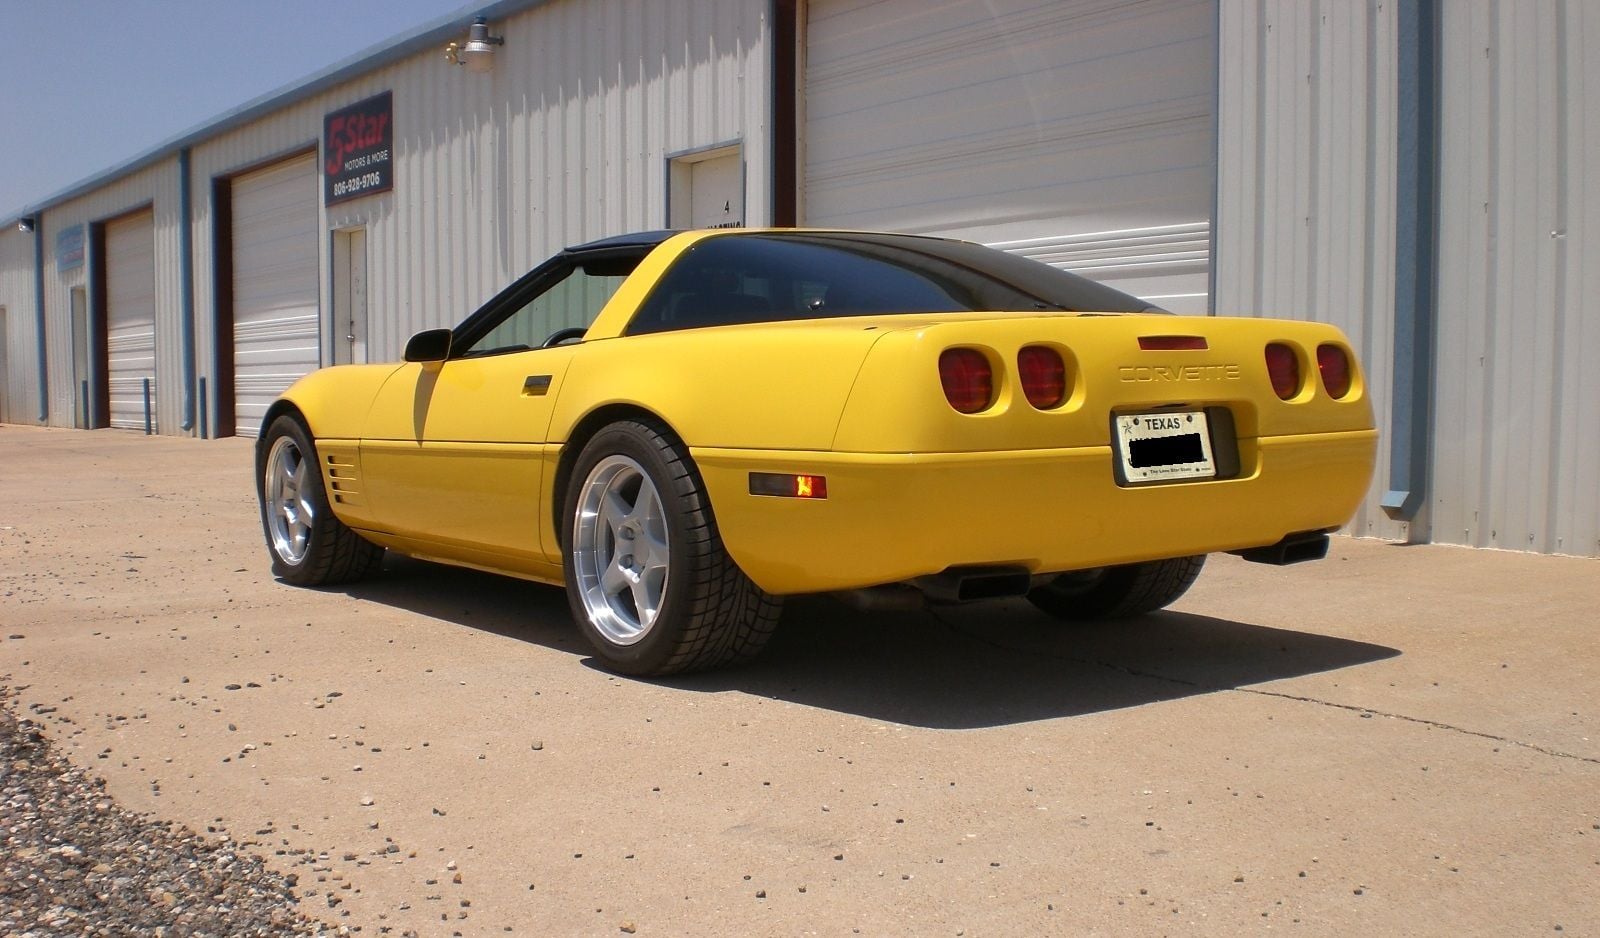 1991 Chevrolet Corvette - 1991 Chevy Corvette - Used - VIN 1G1YY2388M5107274 - 182,000 Miles - 8 cyl - 2WD - Automatic - Hatchback - Yellow - Lubbock, TX 79424, United States